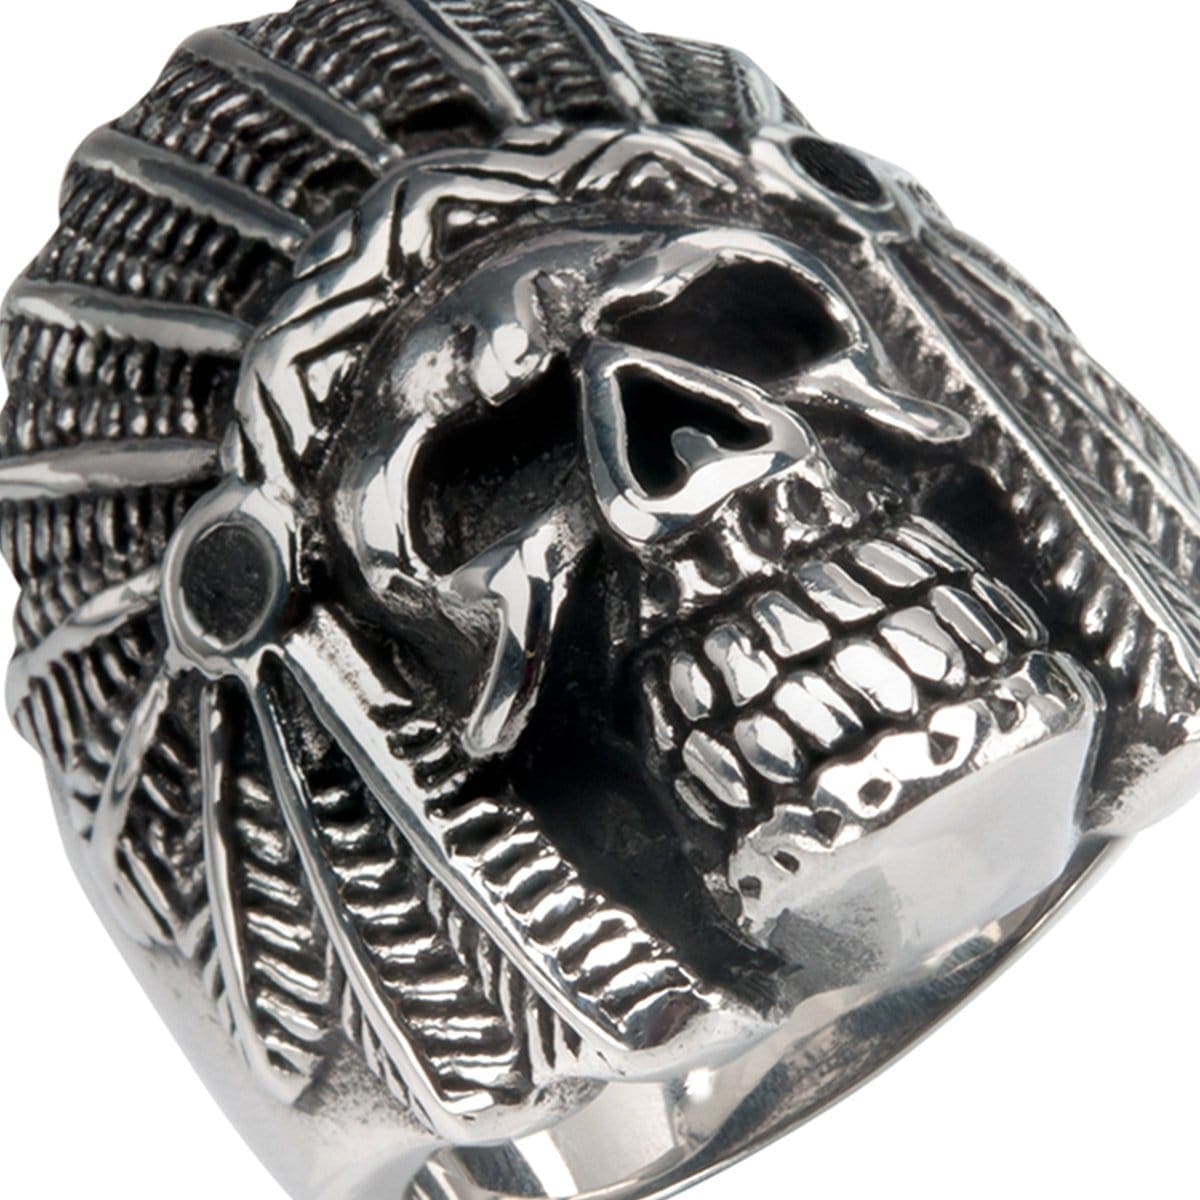 INOX JEWELRY Rings Antiqued Silver Tone Stainless Steel Native American Chief Skull Ring